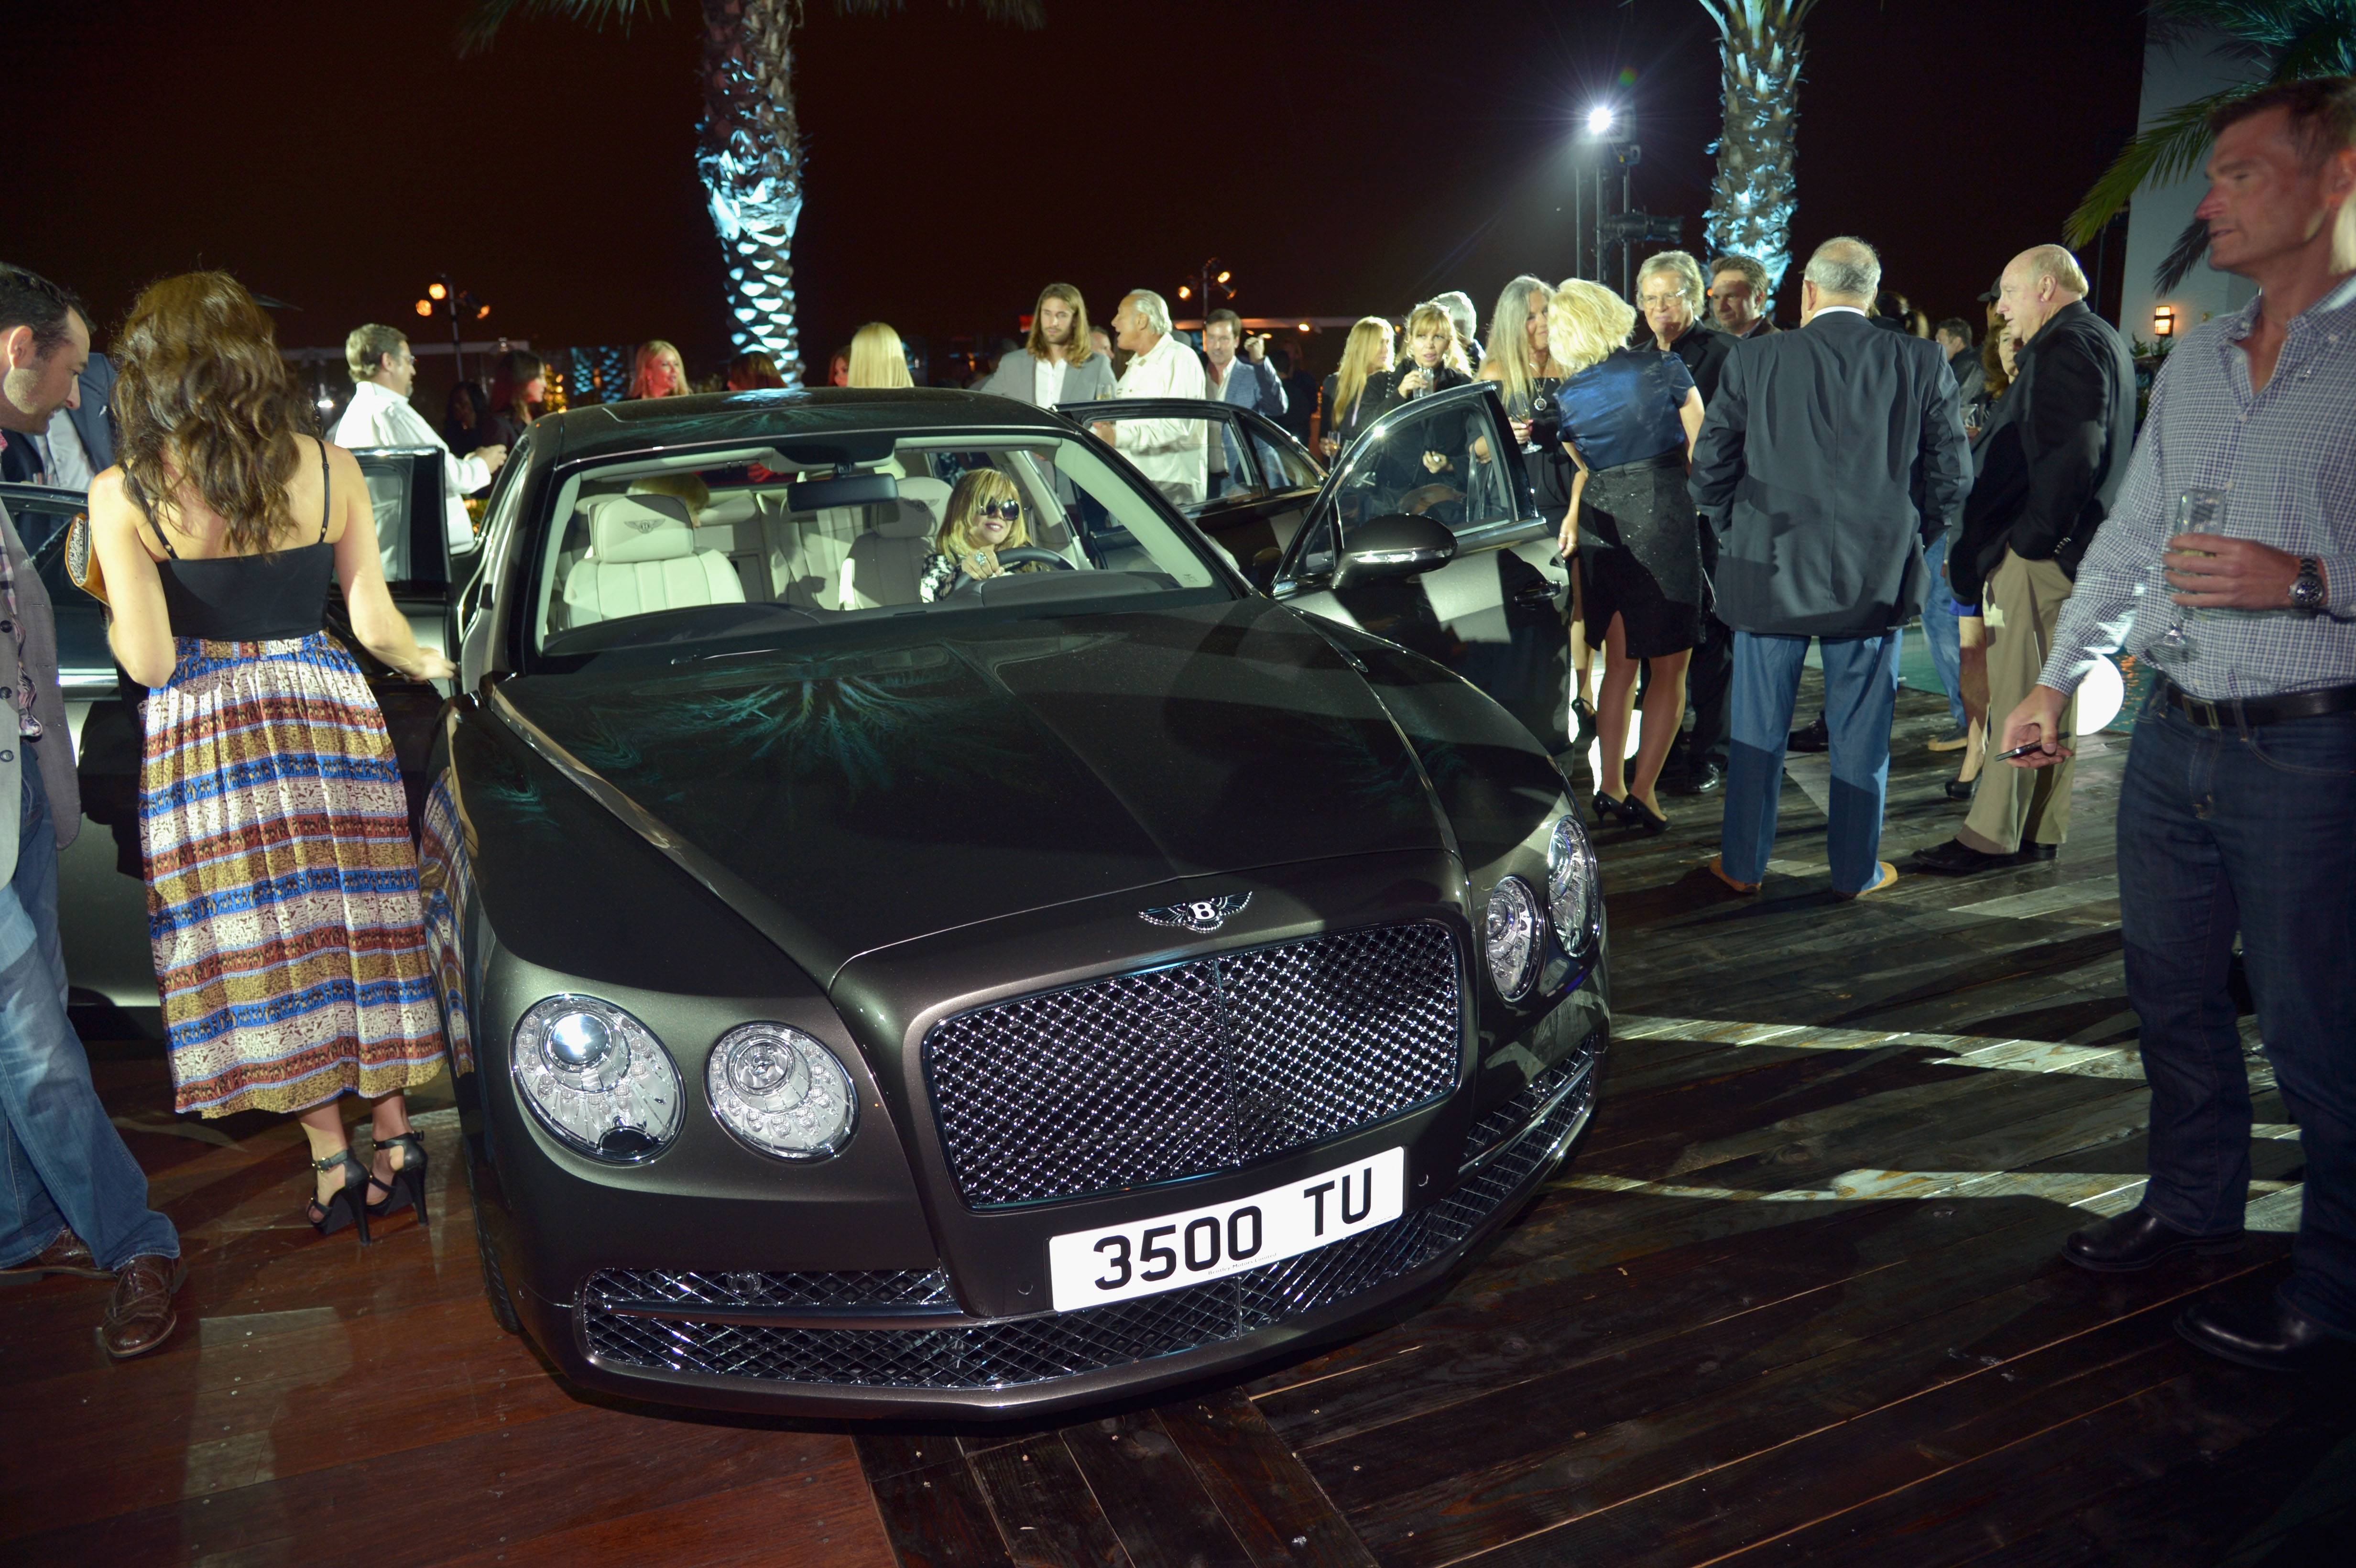 DEPARTURES+Bentley: One Night Only LA, Launch Of The New Flying Spur